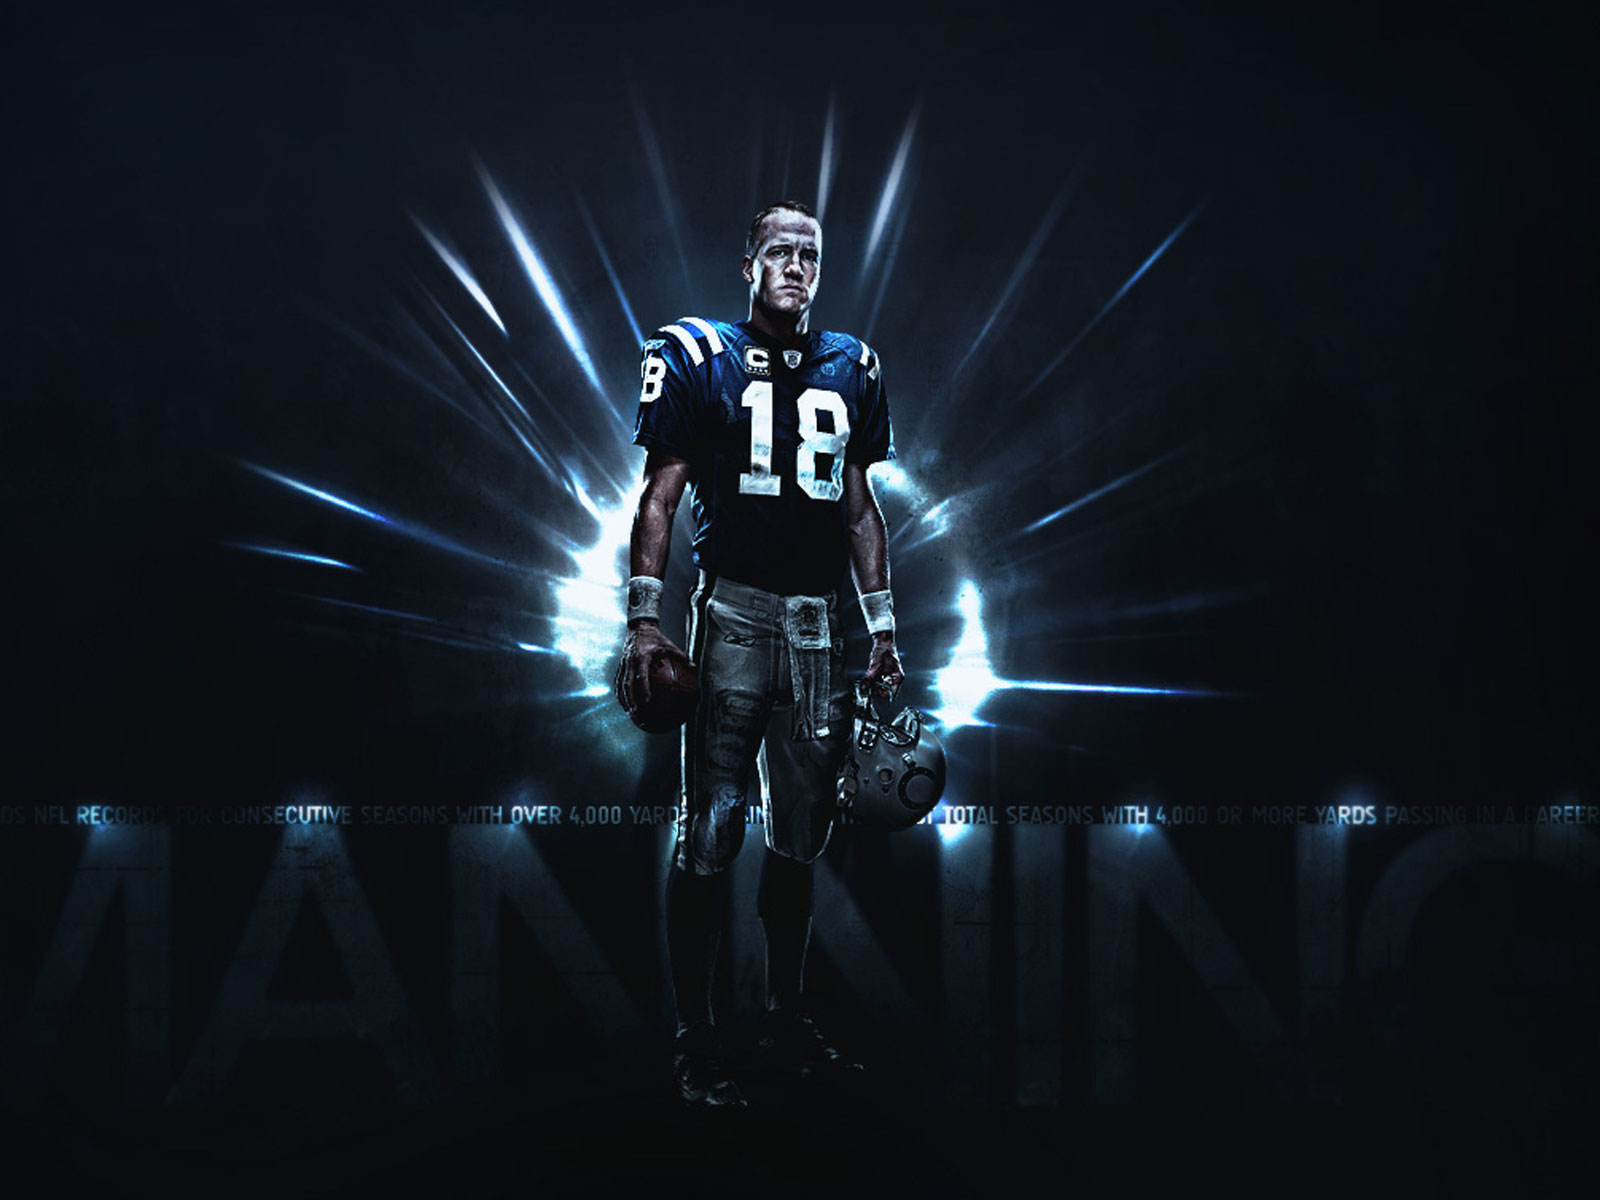 Nfl Peyton Manning Indianapolis Colts HD Wallpaper Full Size